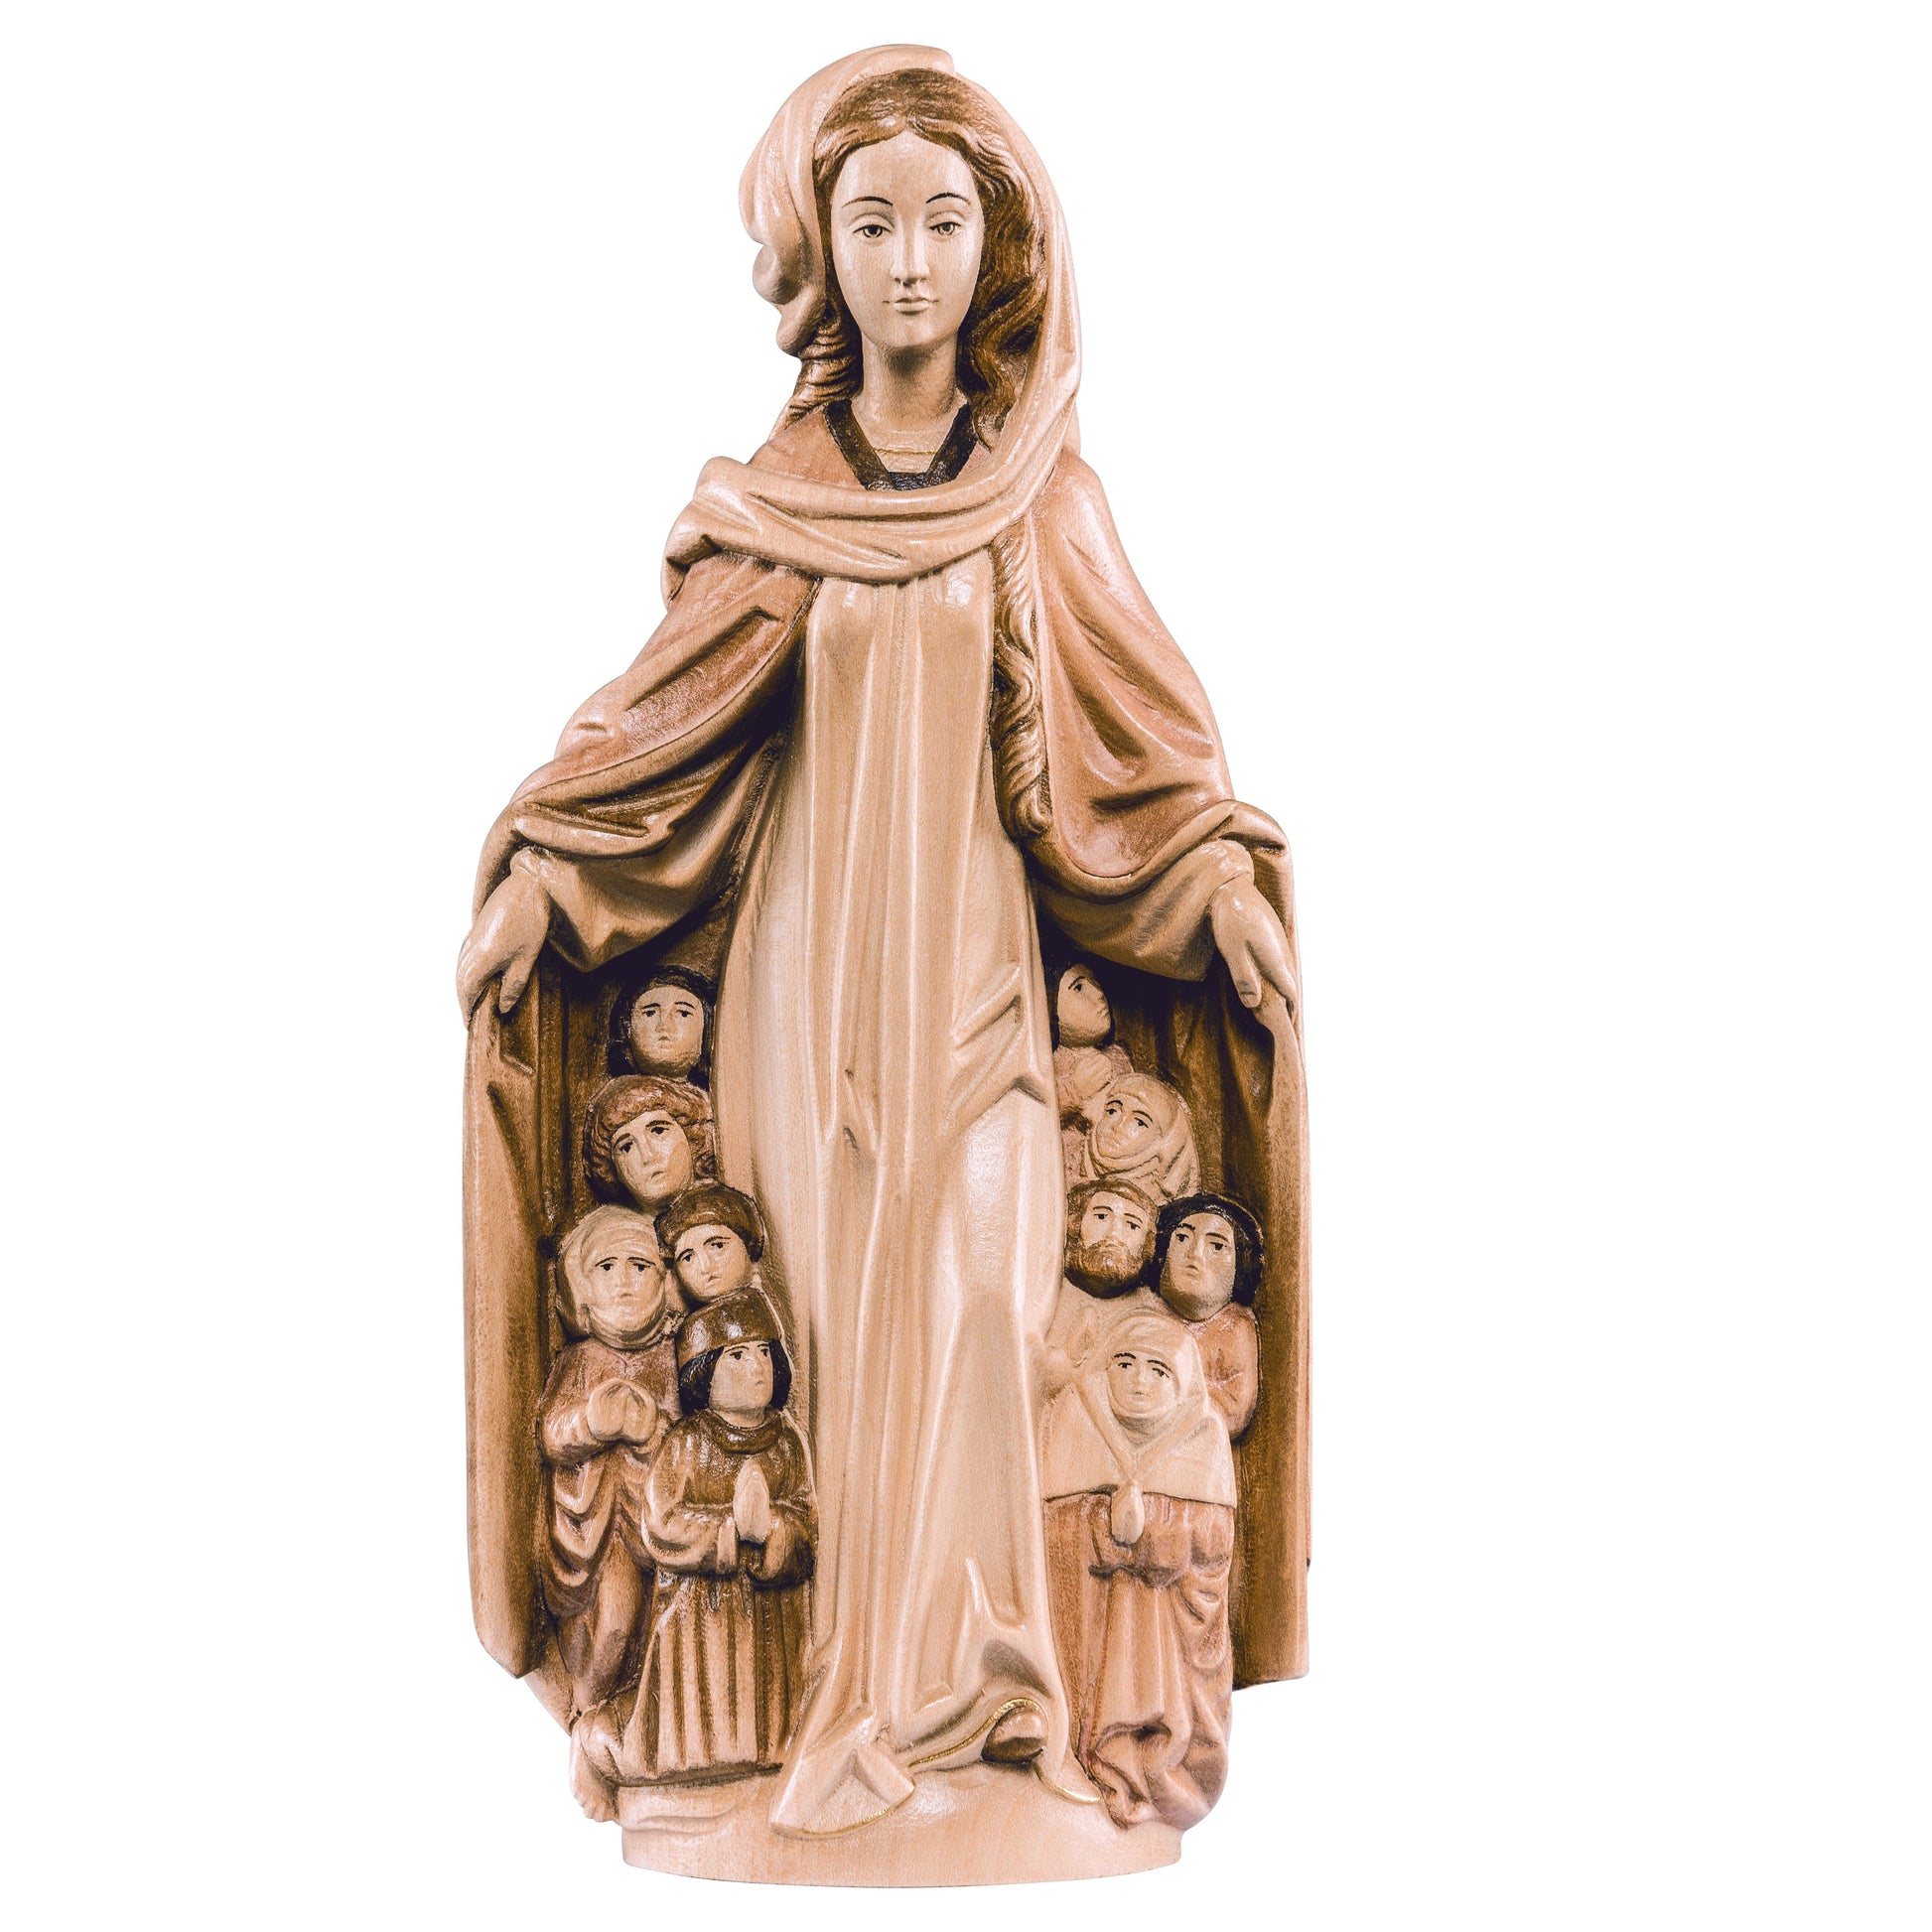 MONDO CATTOLICO Glossy / 13 cm (5.1 in) Wooden statue of Madonna of protective cloak